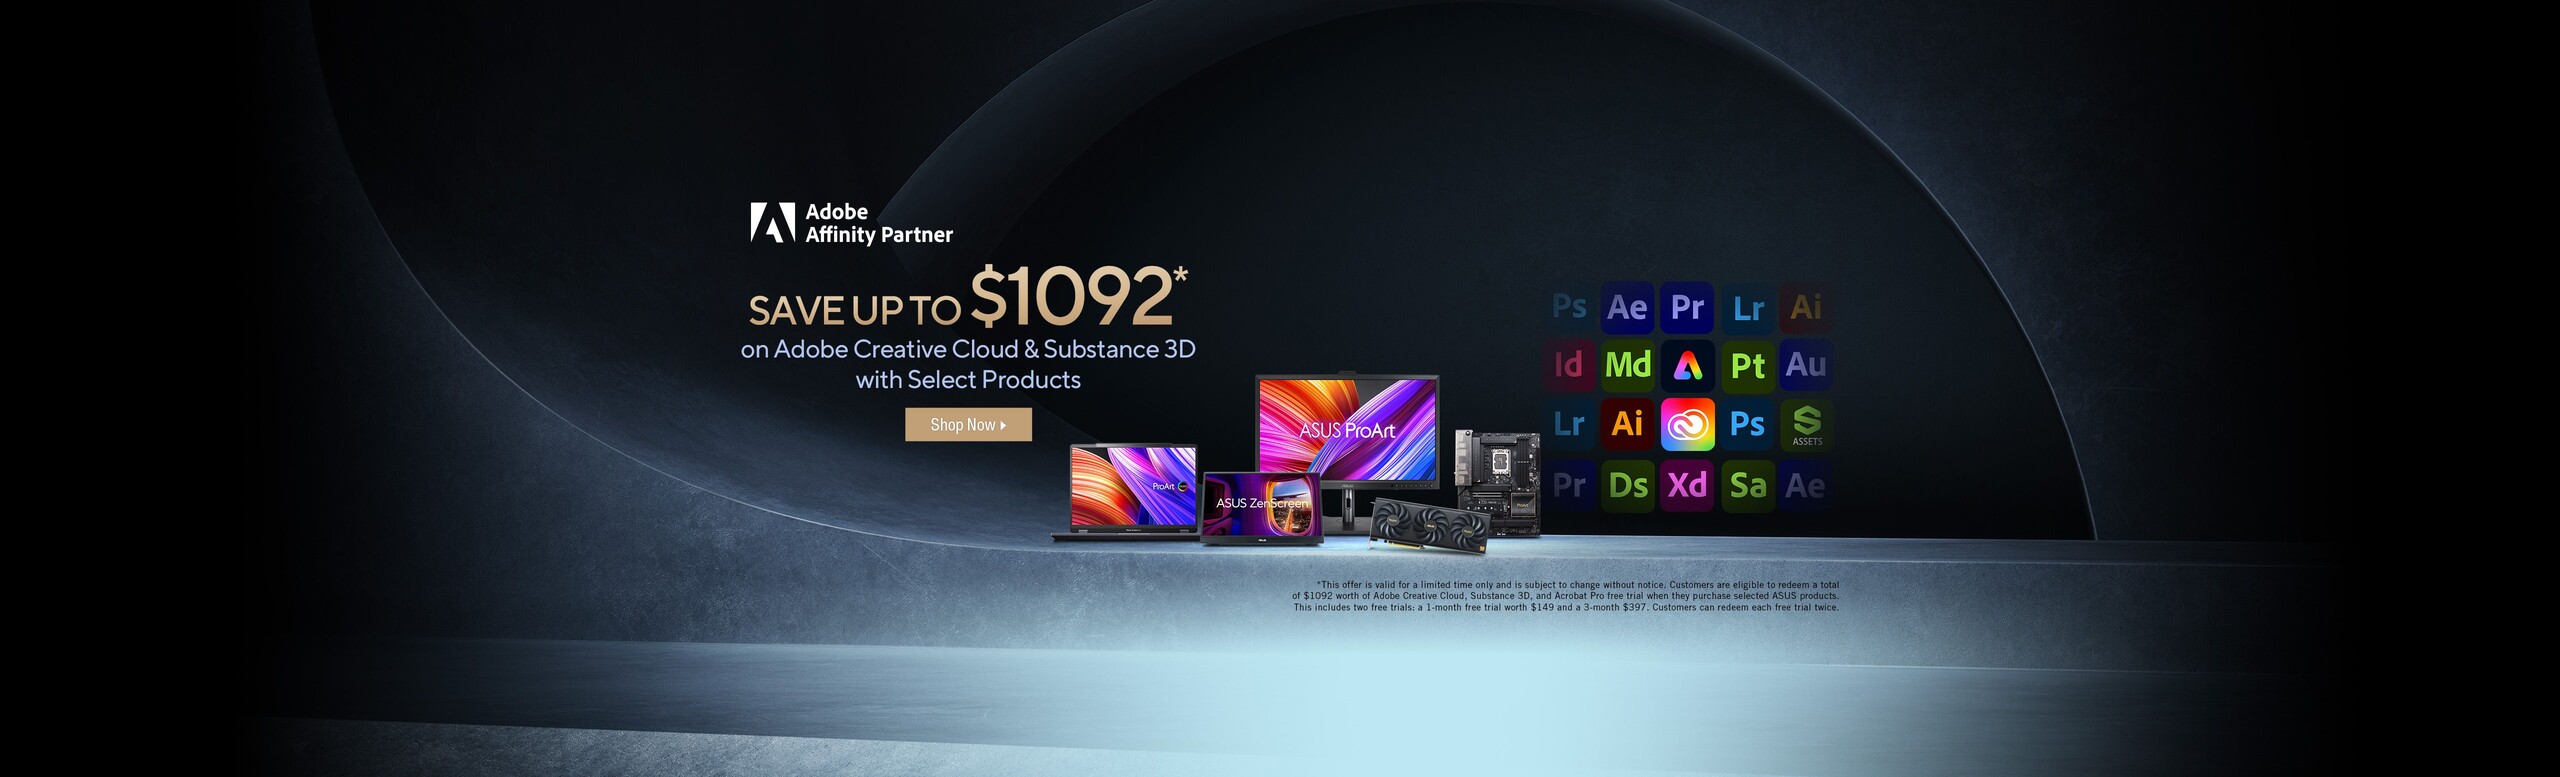 Save Up to $1092 * on Adobe Creative Cloud & Substance 3D with Select Products  *This offer is valid for a limited time only and is subject to change without notice.